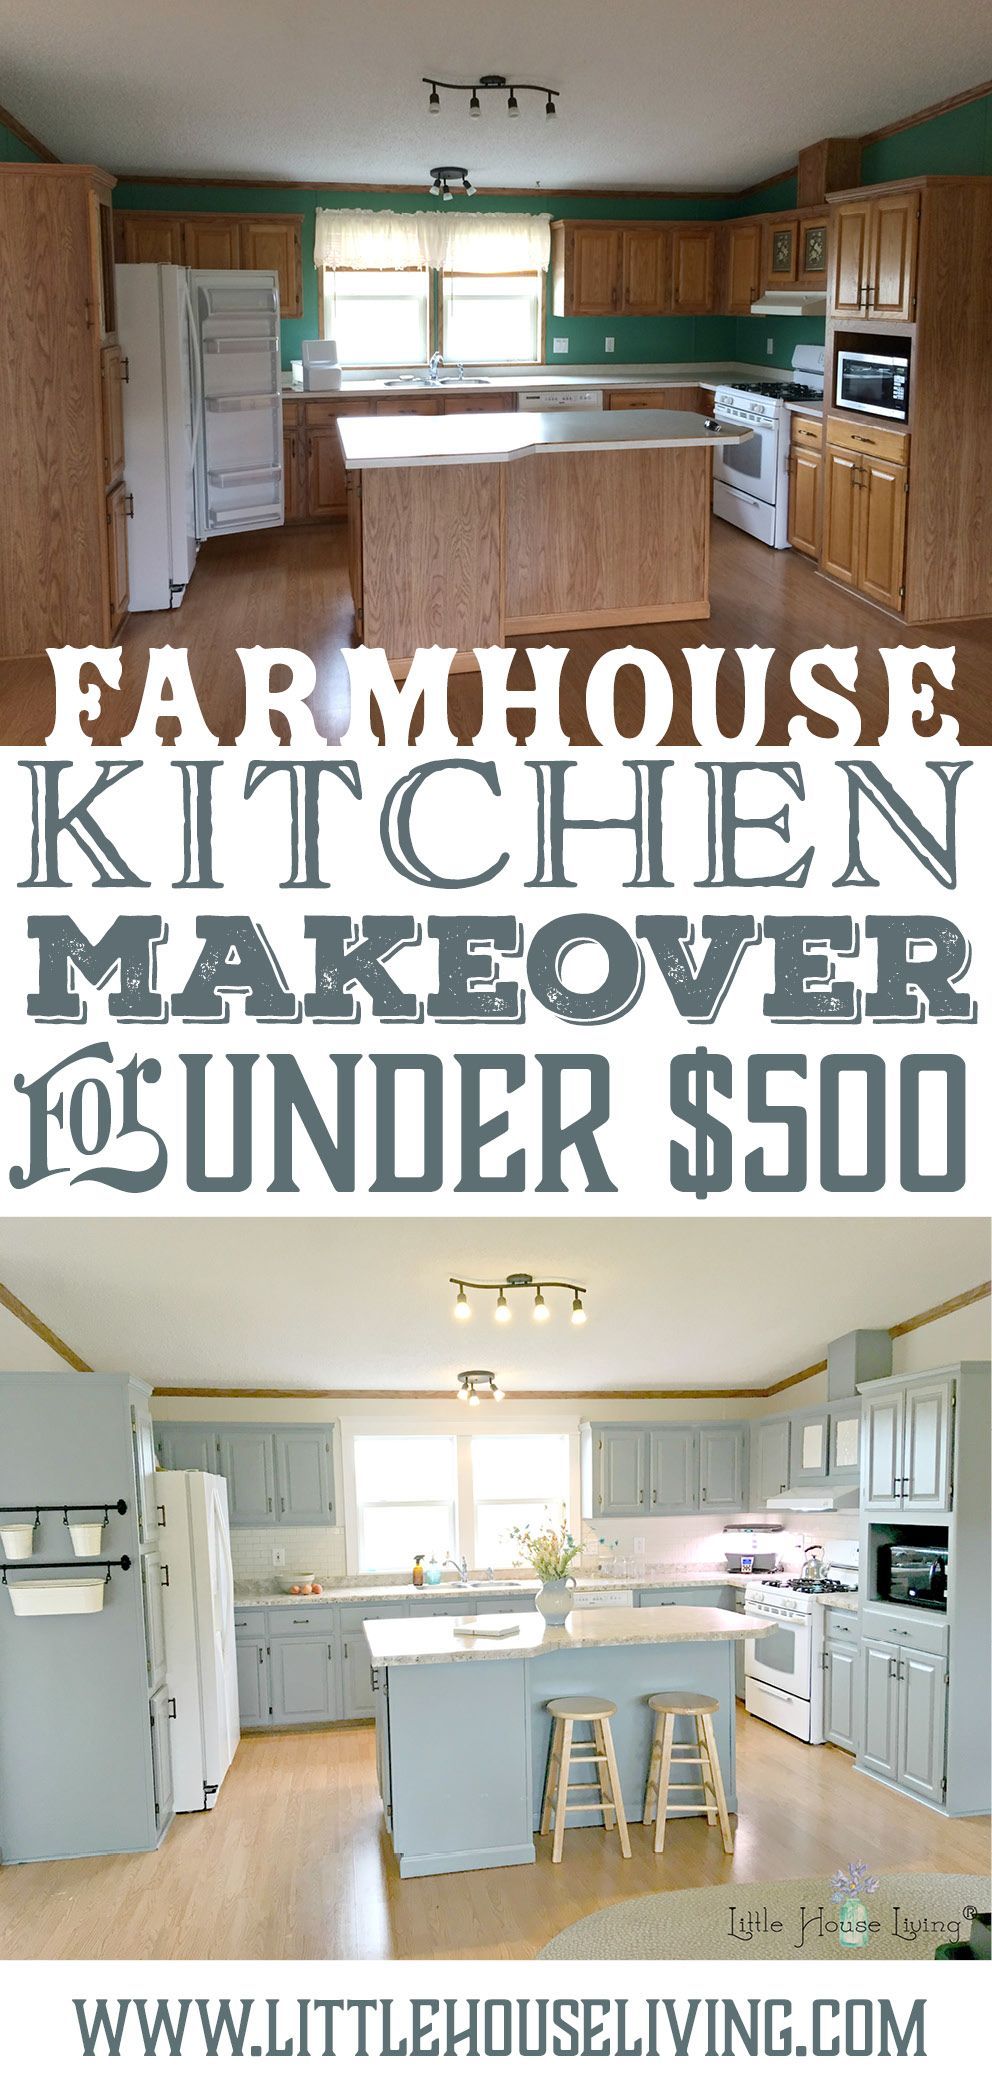 Farmhouse Style Kitchen Makeover for Under $500 - Farmhouse Style Kitchen Makeover for Under $500 -   19 diy House improvements ideas